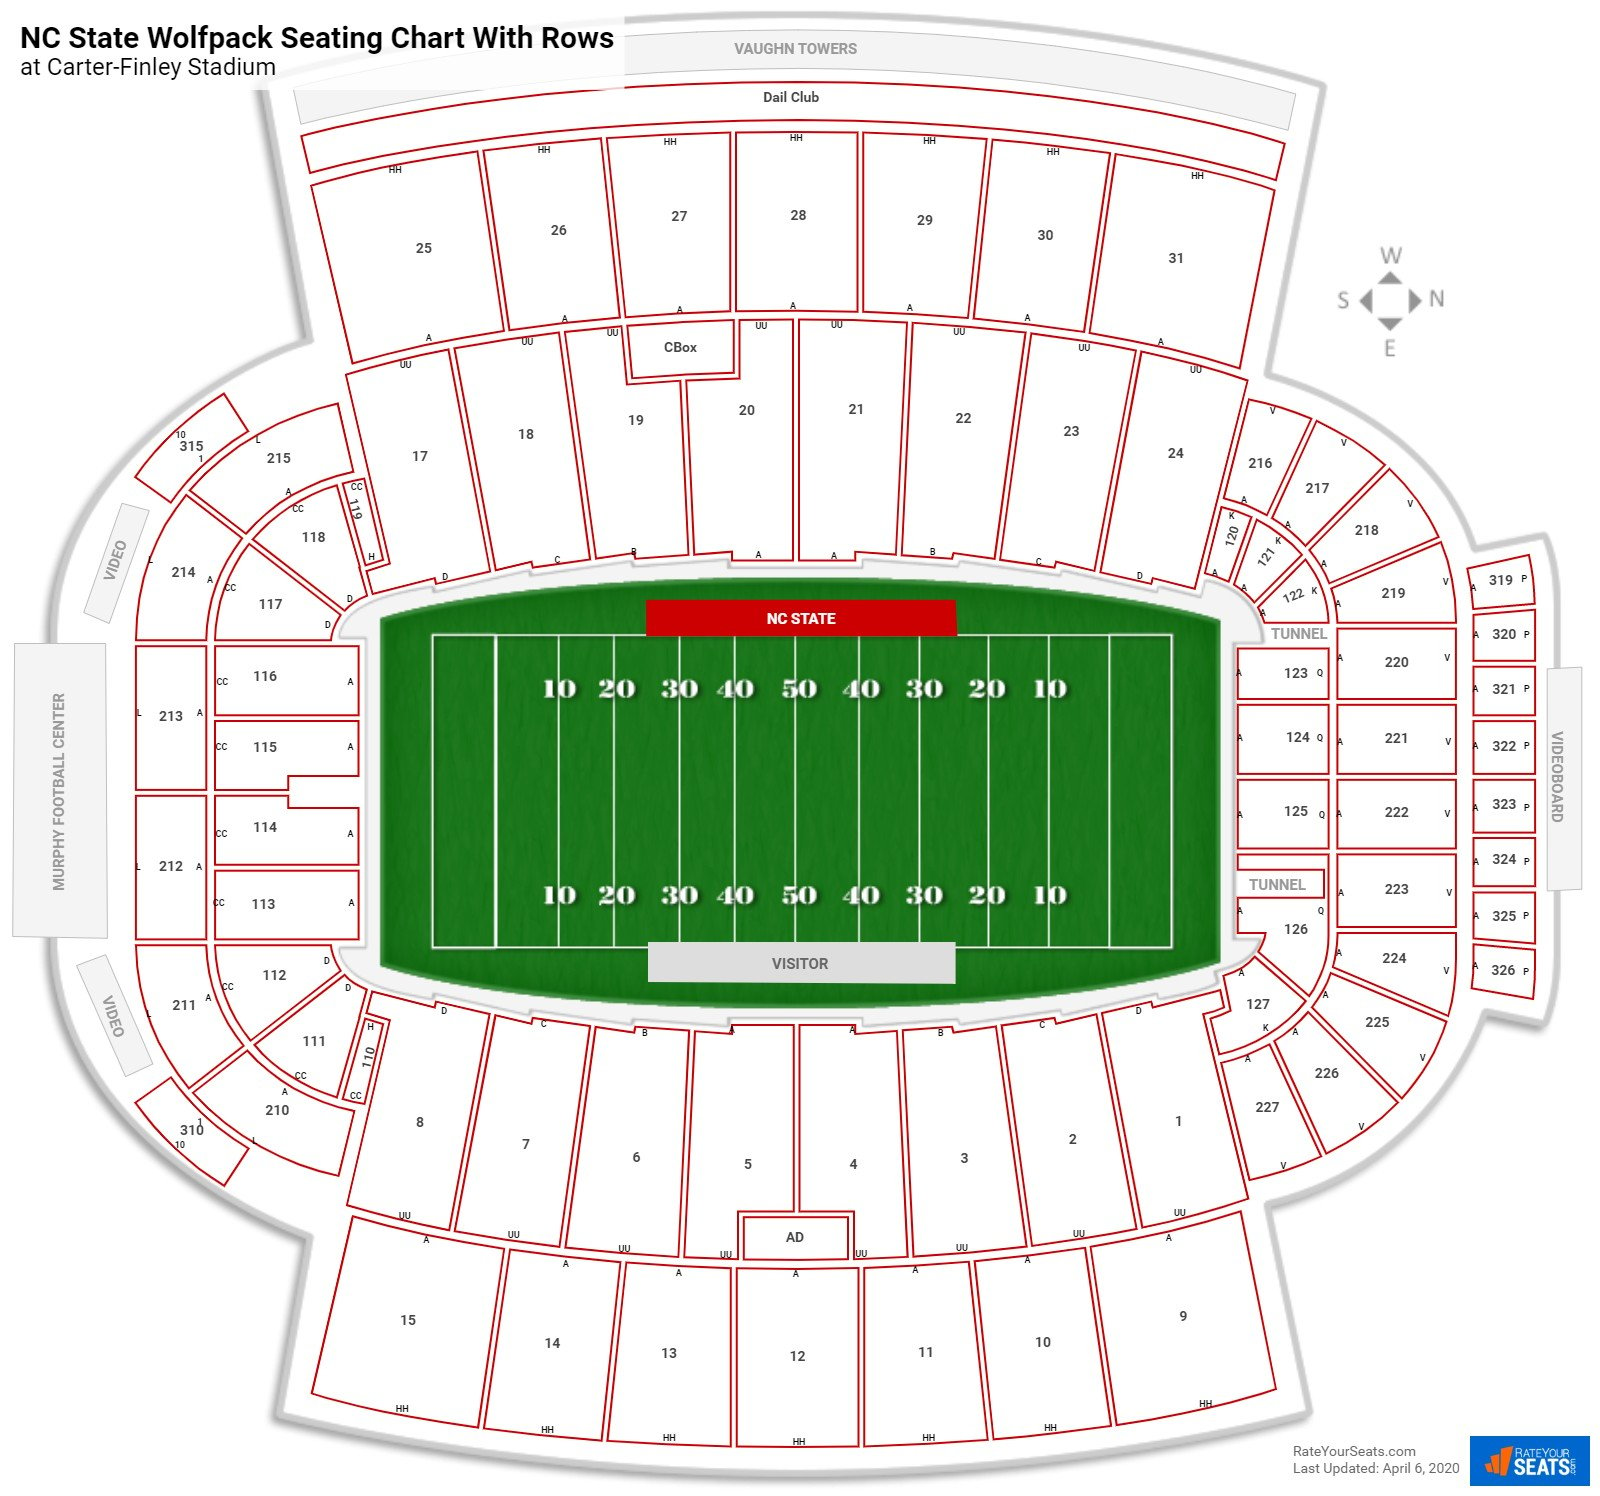 Carter-Finley Stadium seating chart with row numbers